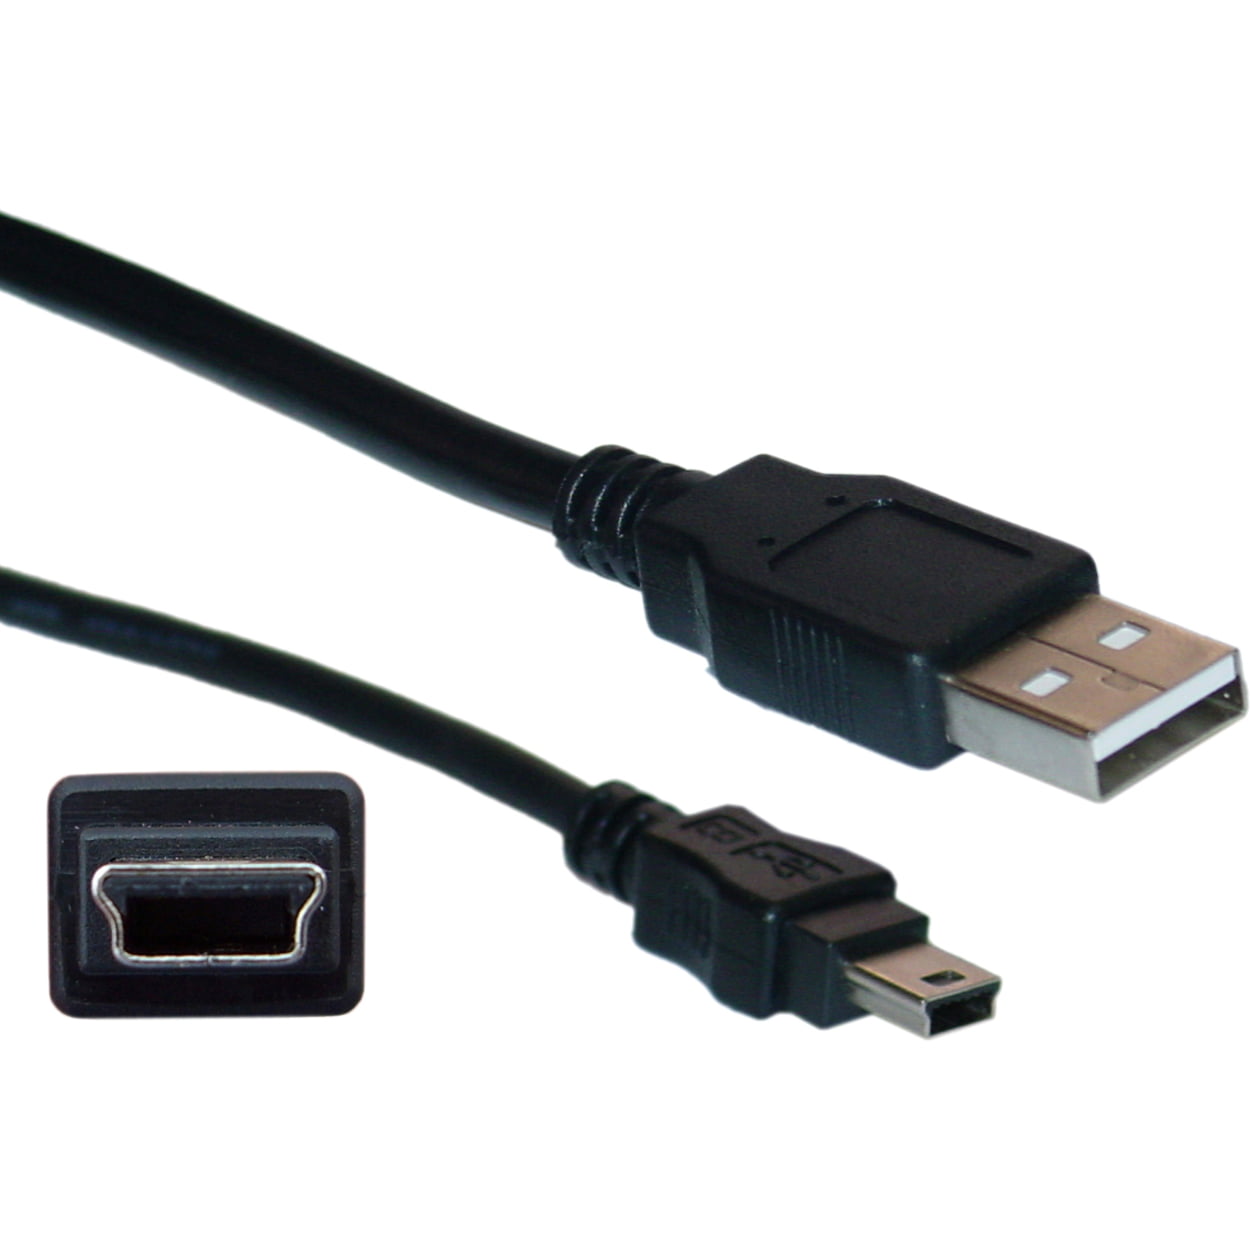 right Cobaka USB 2.0 Male to Mini USB B Type 5pin 90 Degree Up & Down & Left & Right Angled Male Data Cable 25cm 50cm 180cm 500cm 